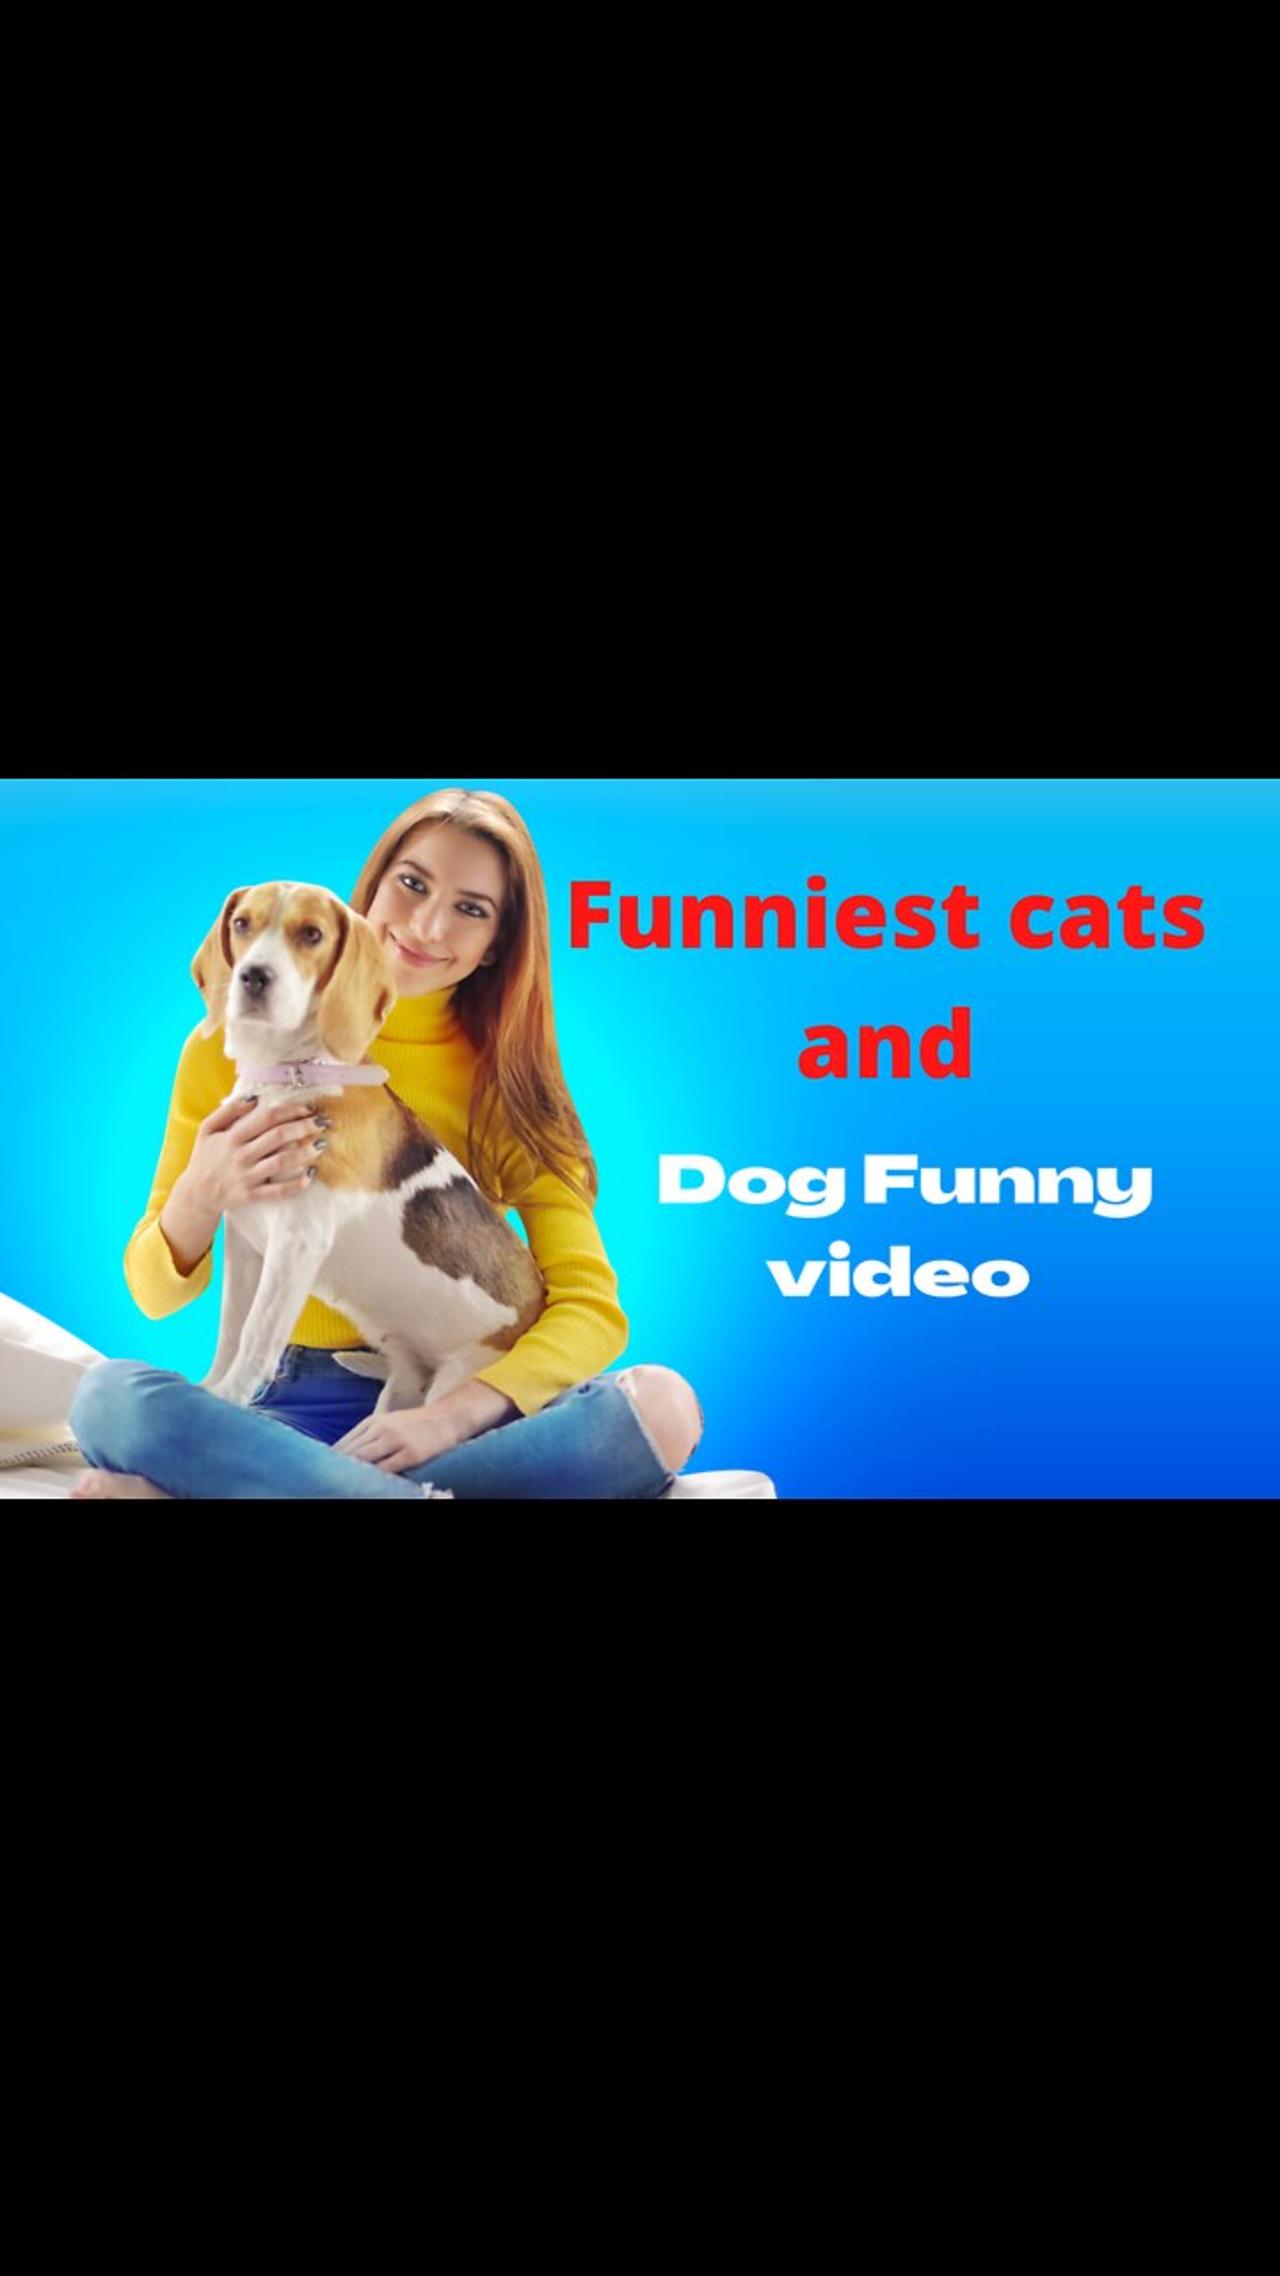 Funniest cats and dogs video funny video